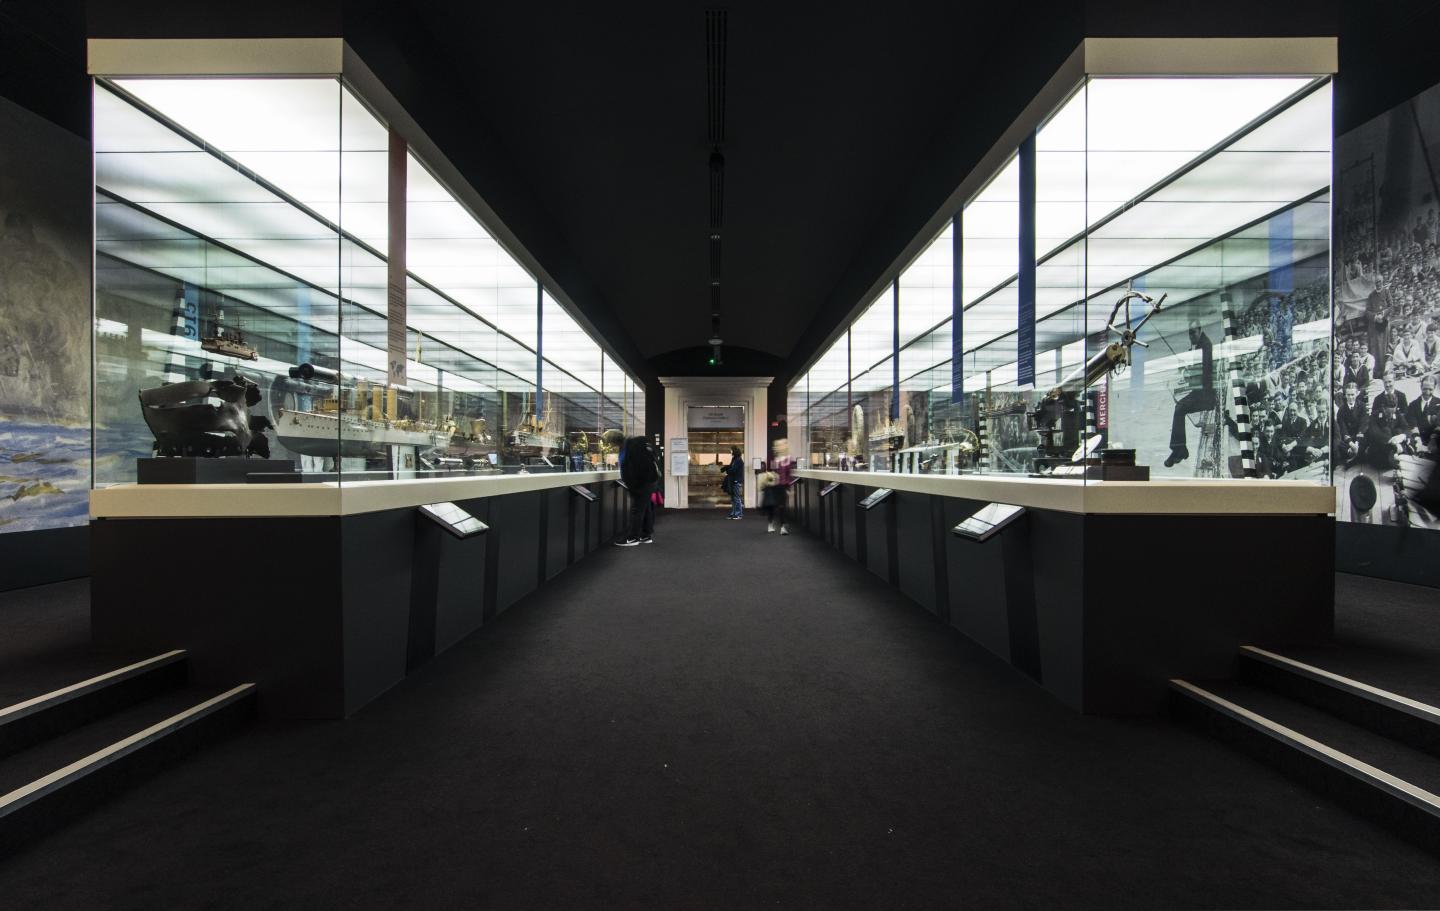 Image of the Forgotten Fighters gallery which has a walkway in the middle of two big glass cases that span the length of the room. They are filled with objects relating to the first world war at sea